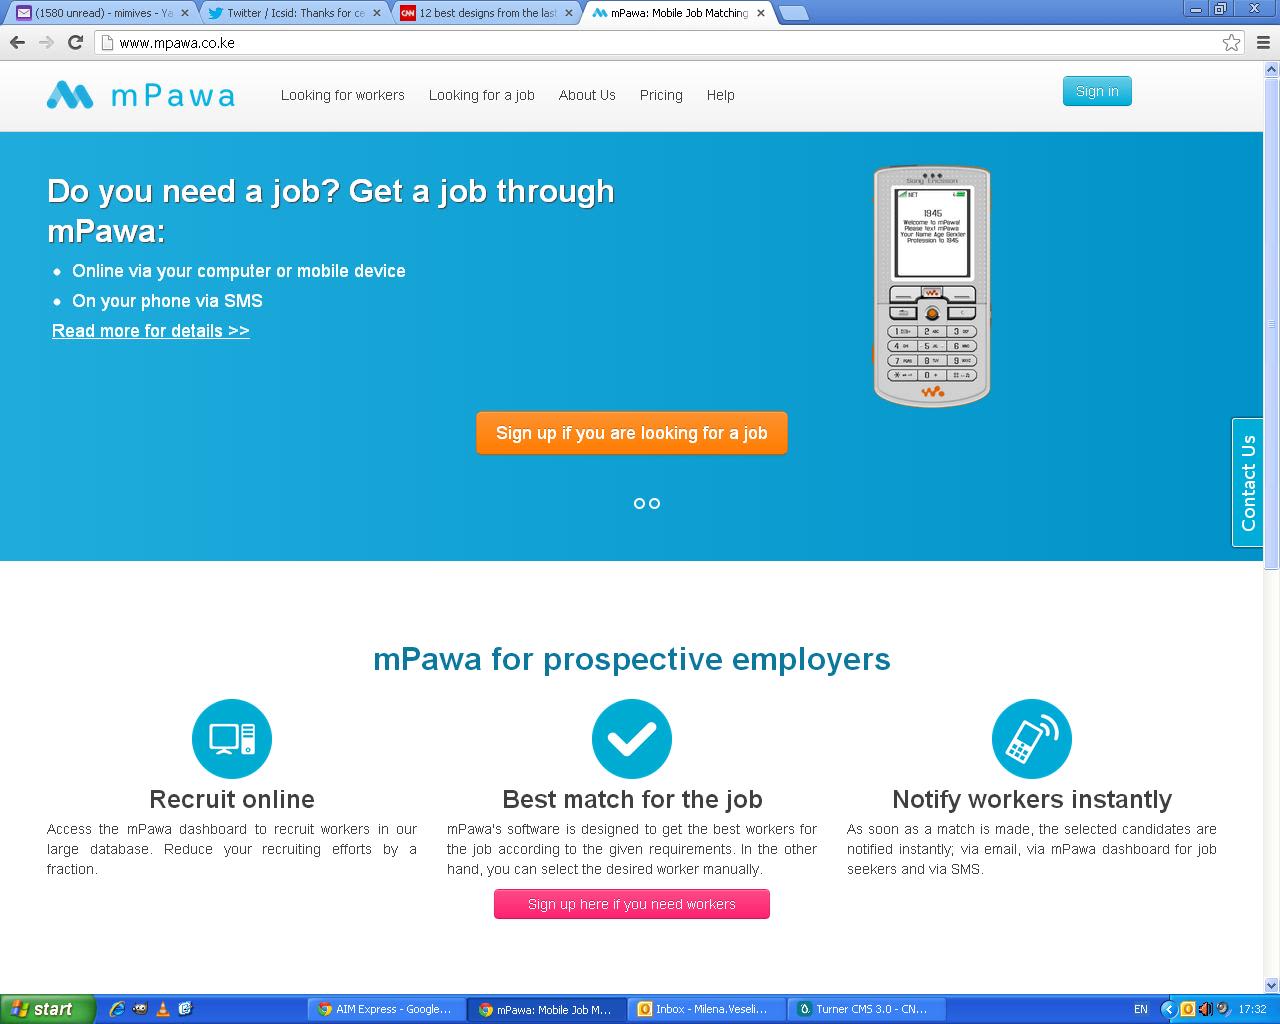 "<a href="http://mpawa.com/" target="_blank" target="_blank">mPawa</a> matches employers with potential employees via skills and experience. It's also SMS-based, which is ideal given that much of Africa is mobile-only."